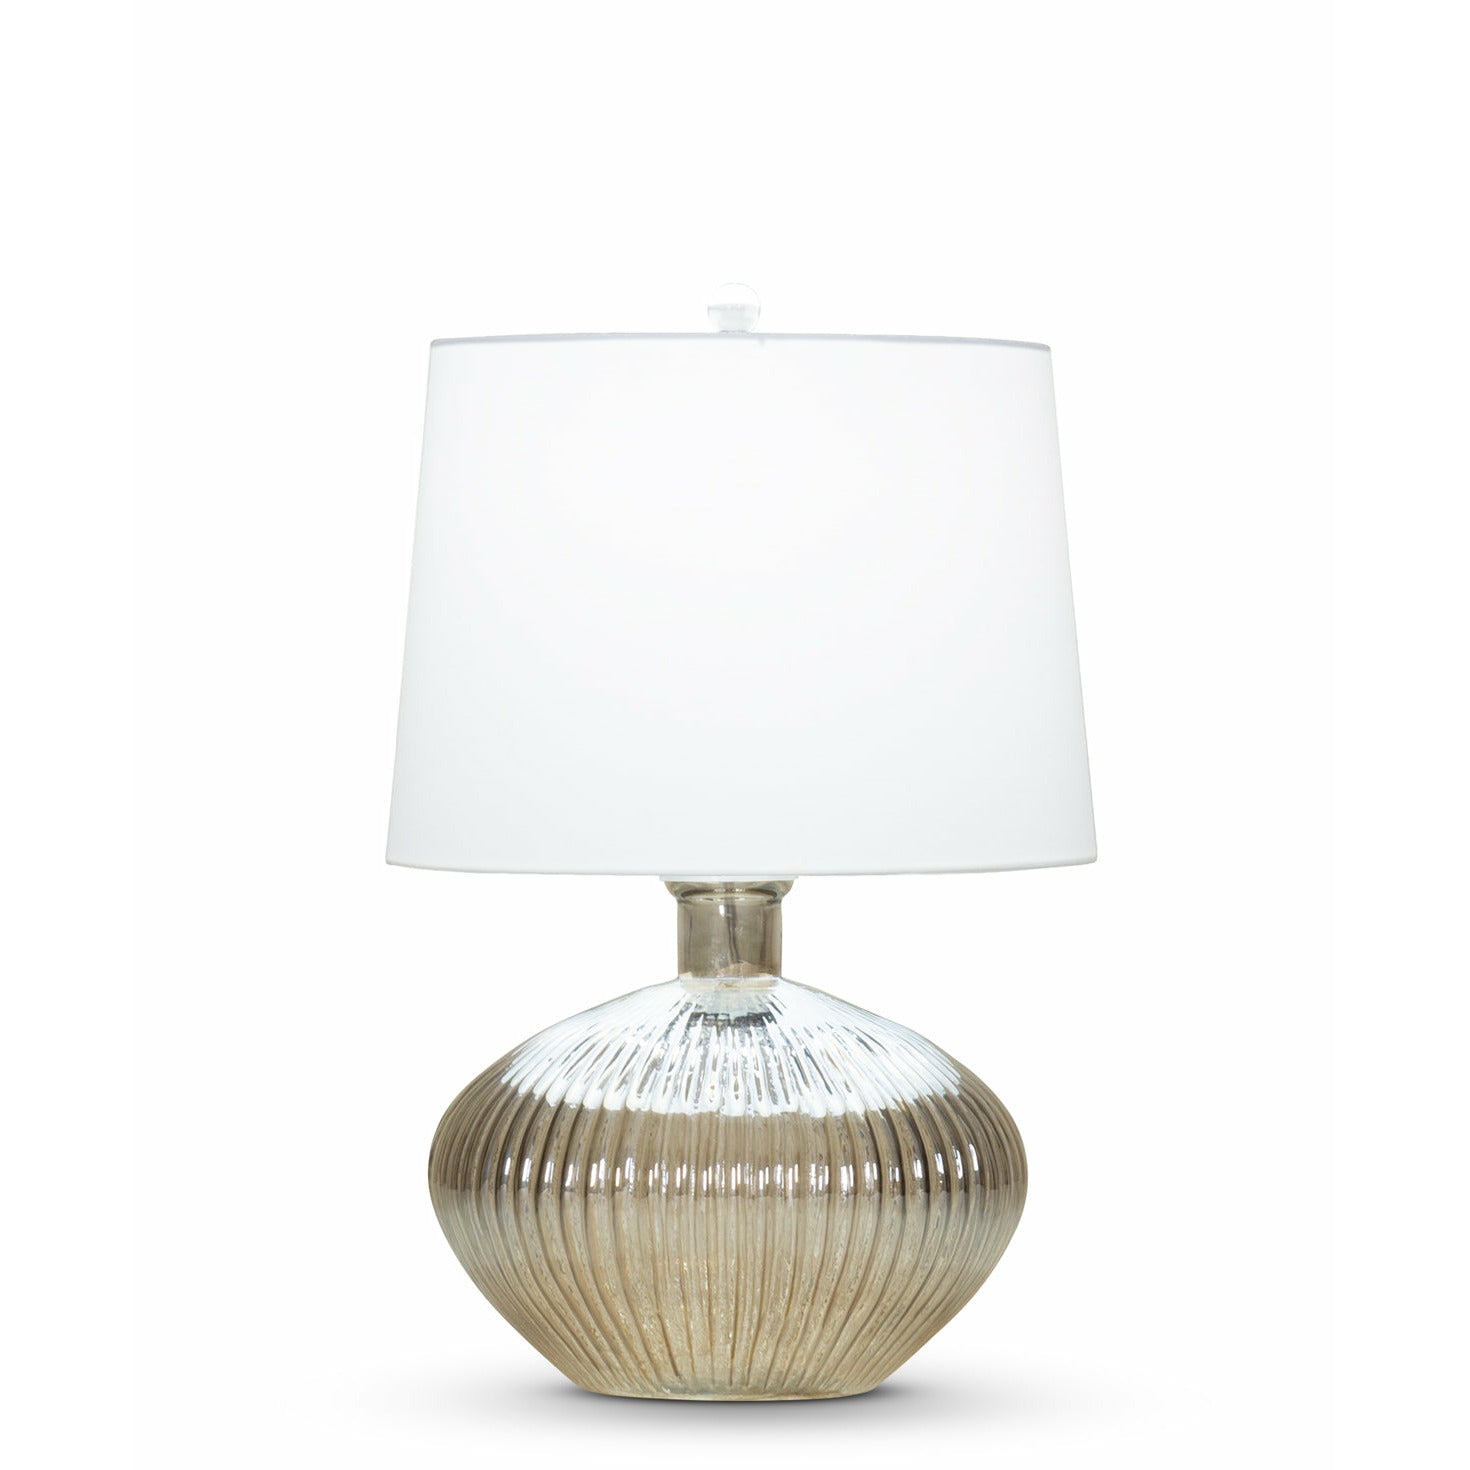 Belize Table Lamp